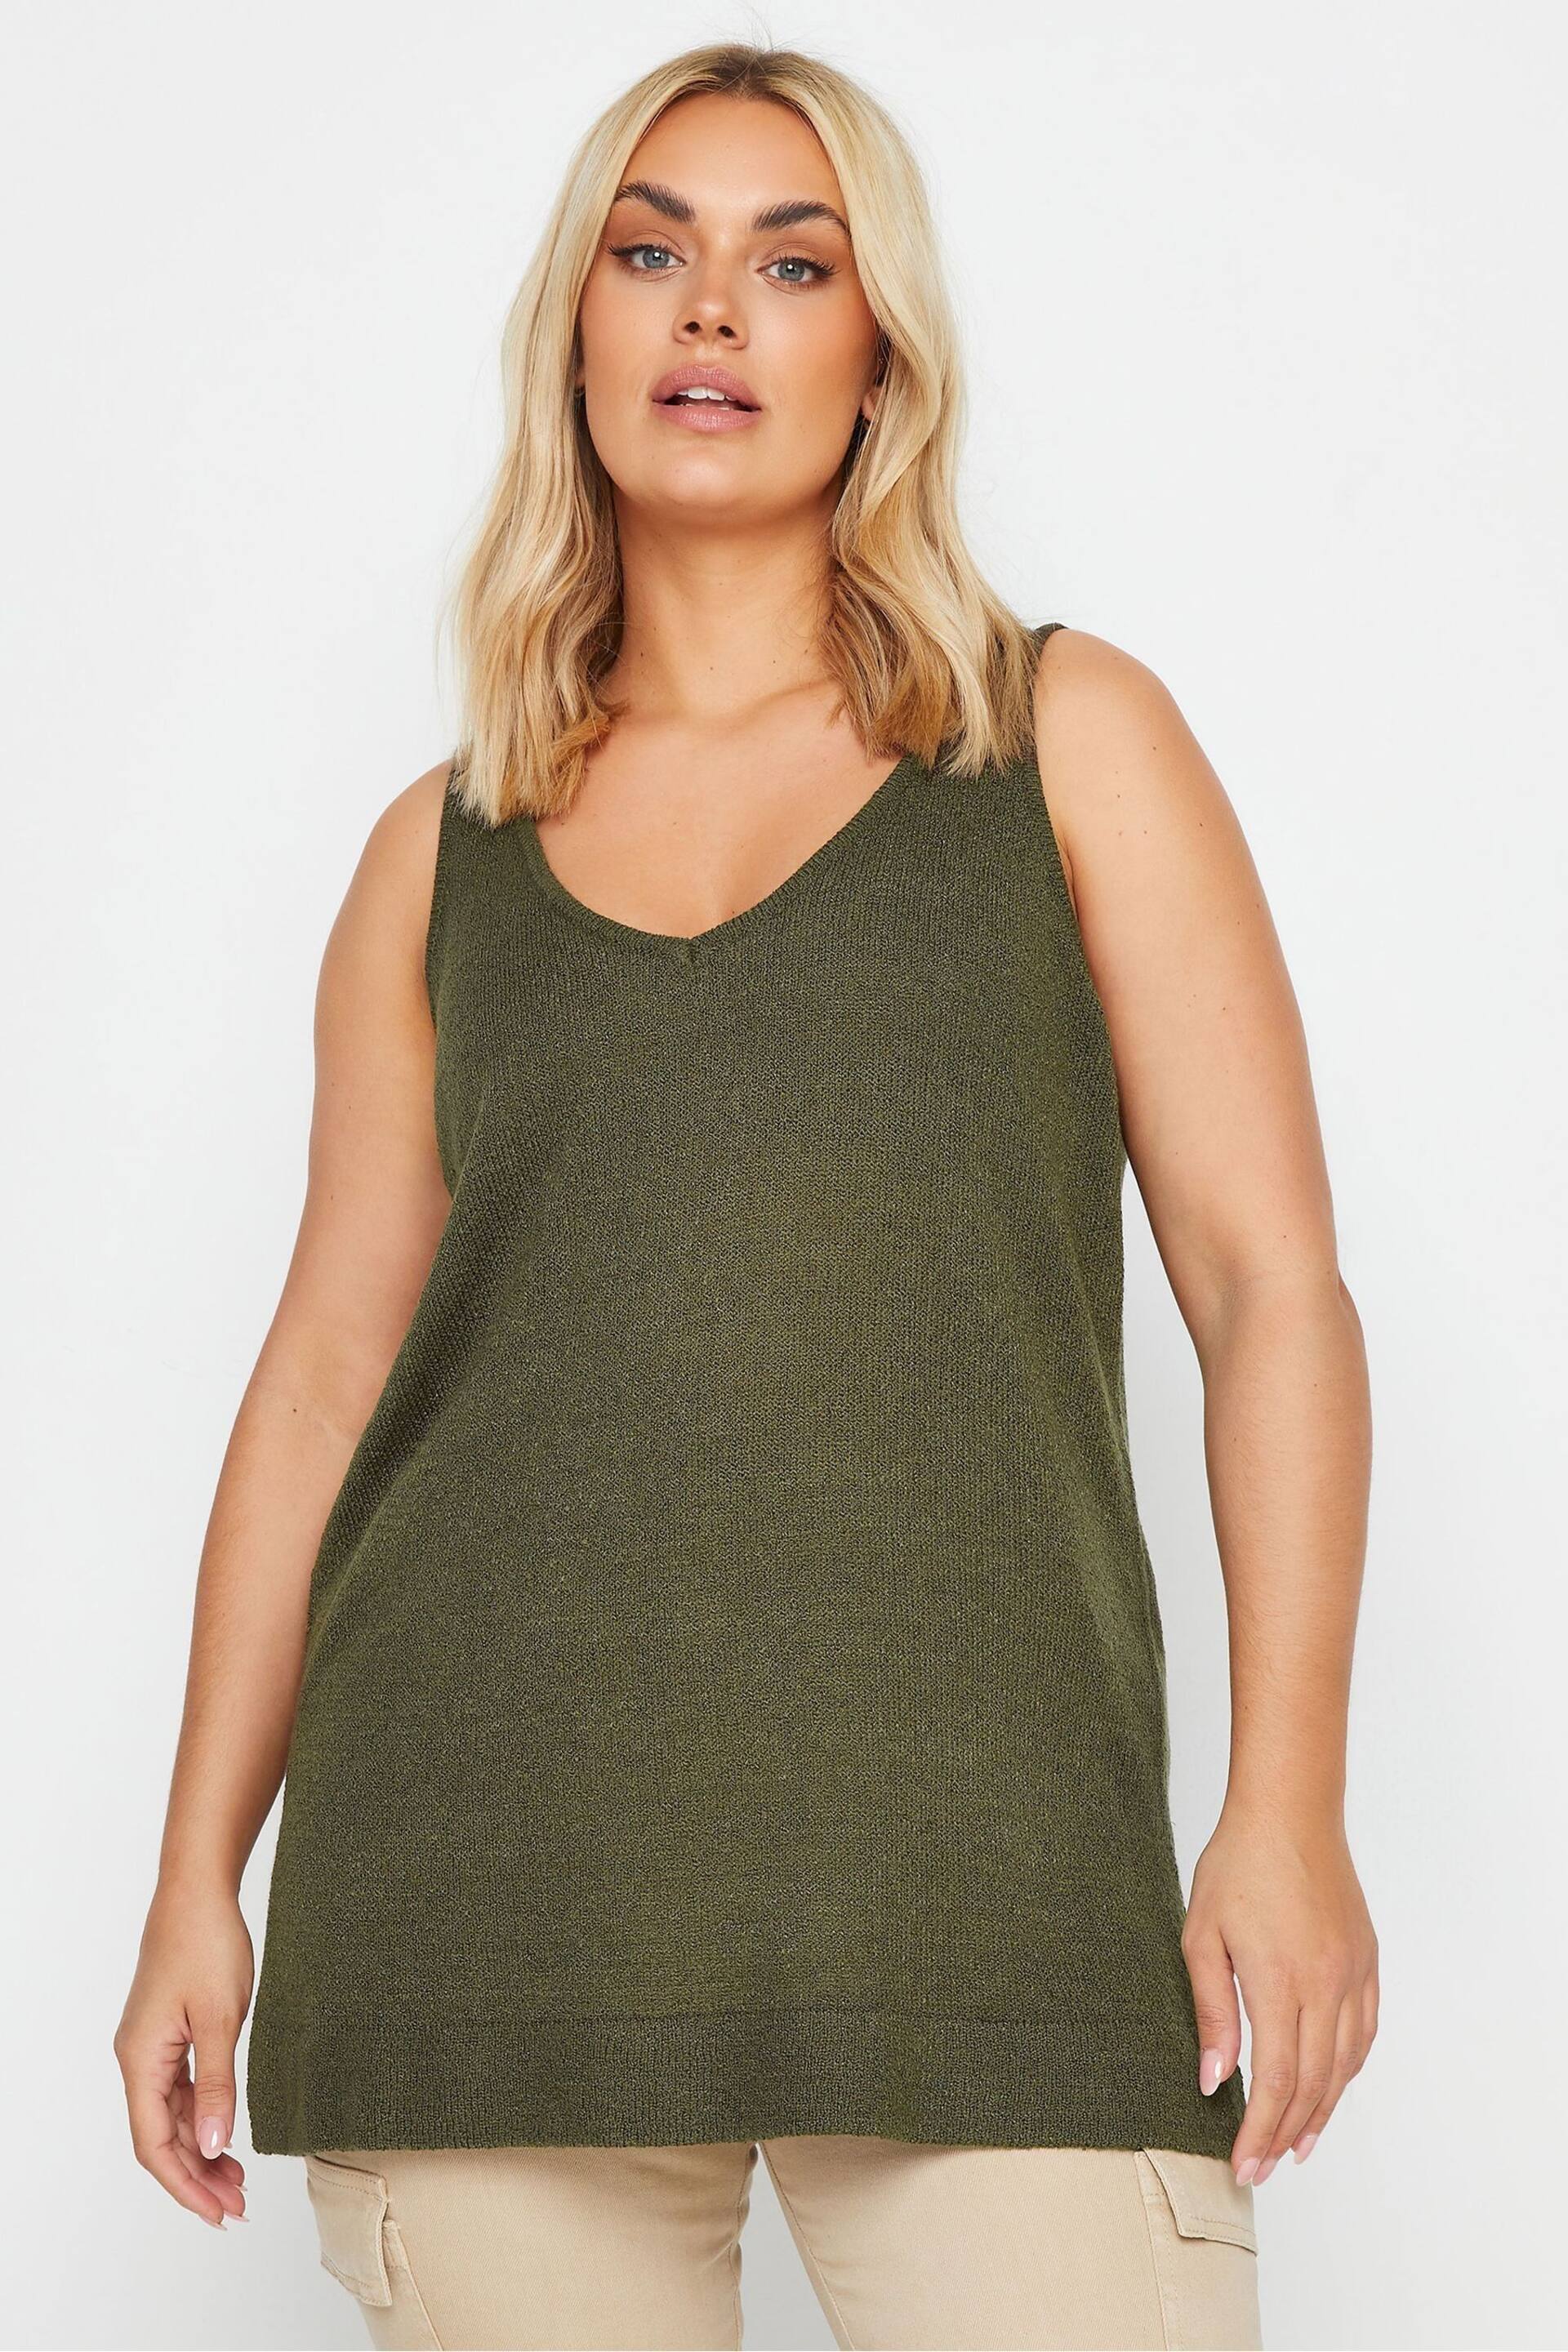 Yours Curve Green Knitted Vest Top - Image 1 of 4